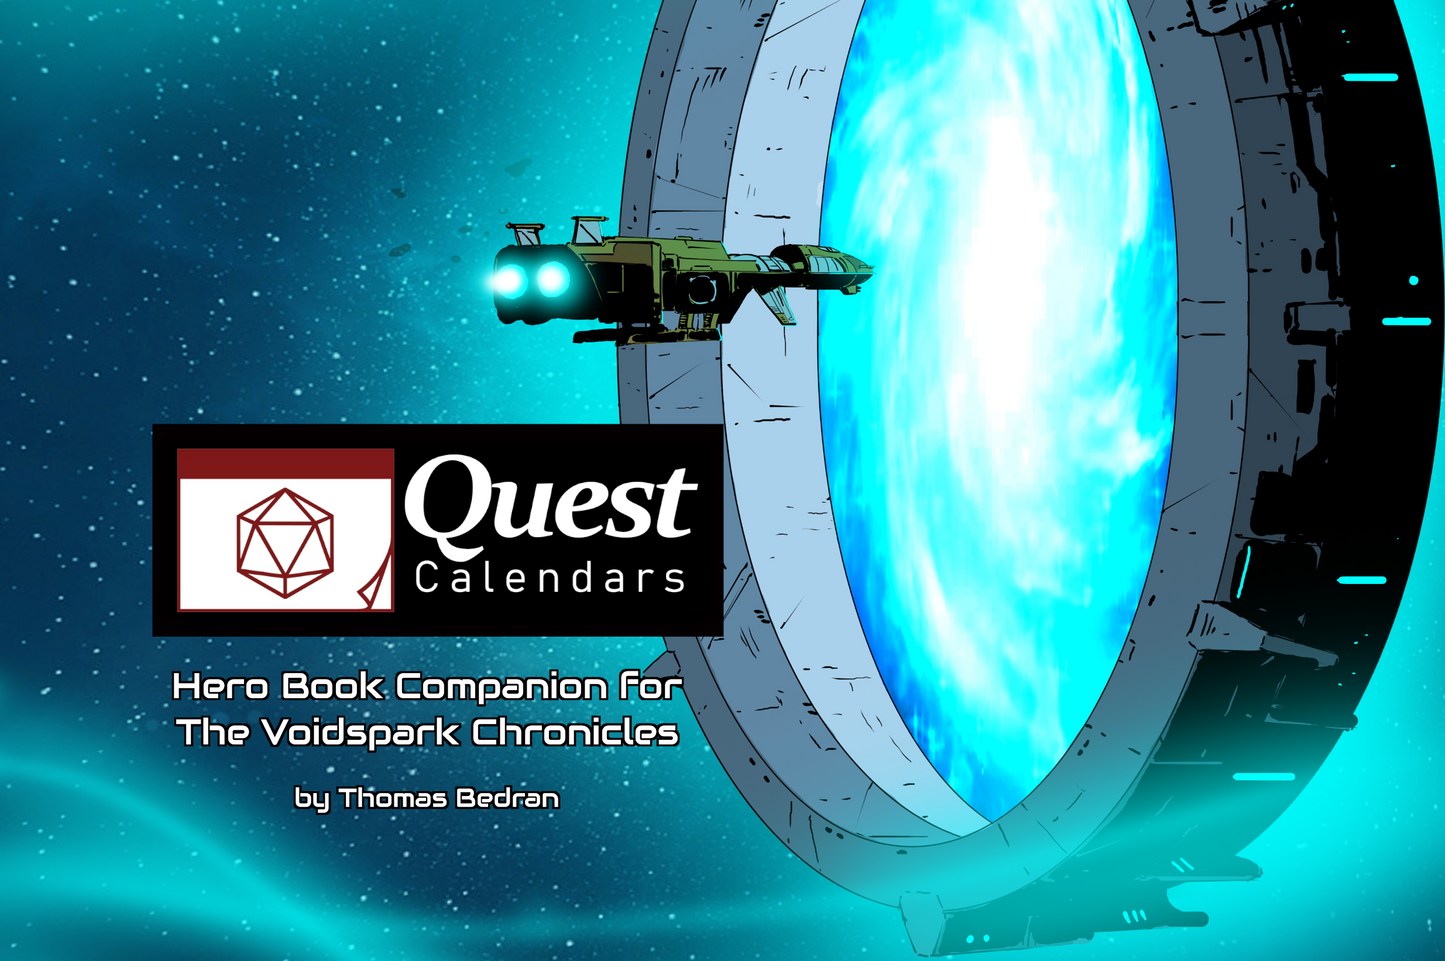 2023 Quest Calendar Voidspark Chronicles with Hero Book